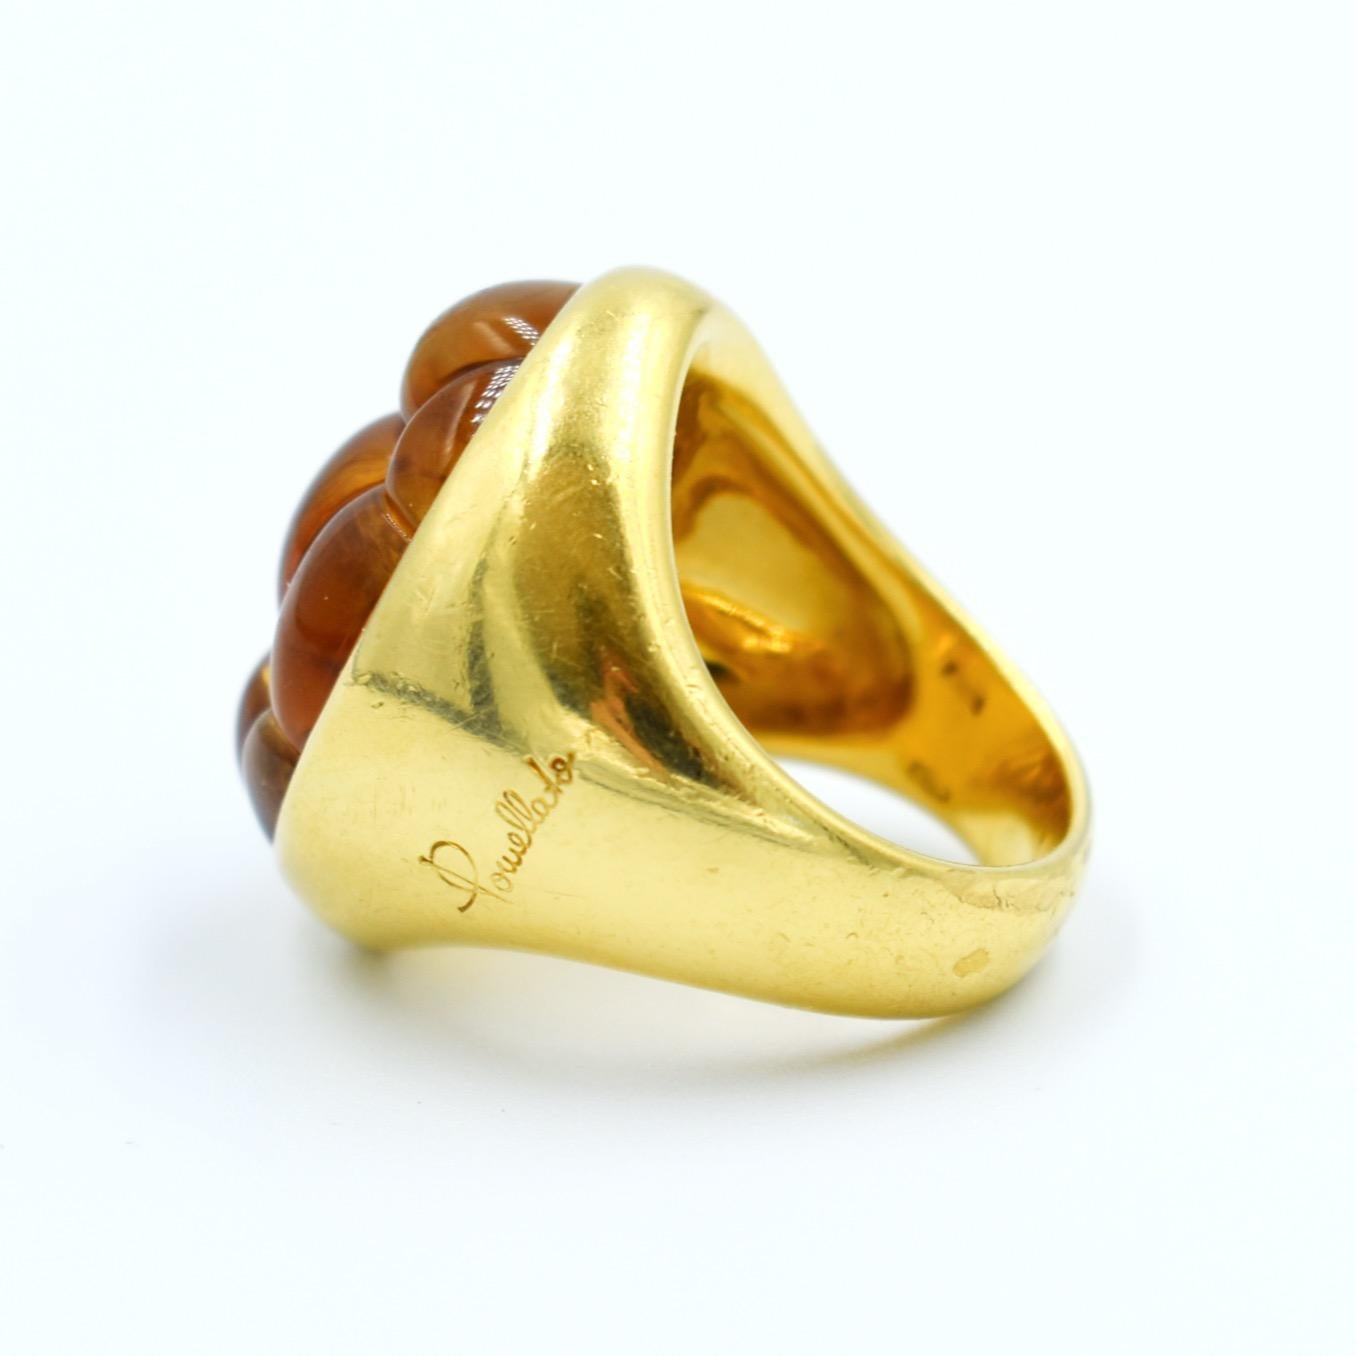 This is a signed Pomellato Mosaico model ring. This vintage ring is crafted in 18-carat gold and adorned with citrines. The citrines, skillfully cut to create a checkerboard pattern, inspired the name of this ring model.
Please note that this model